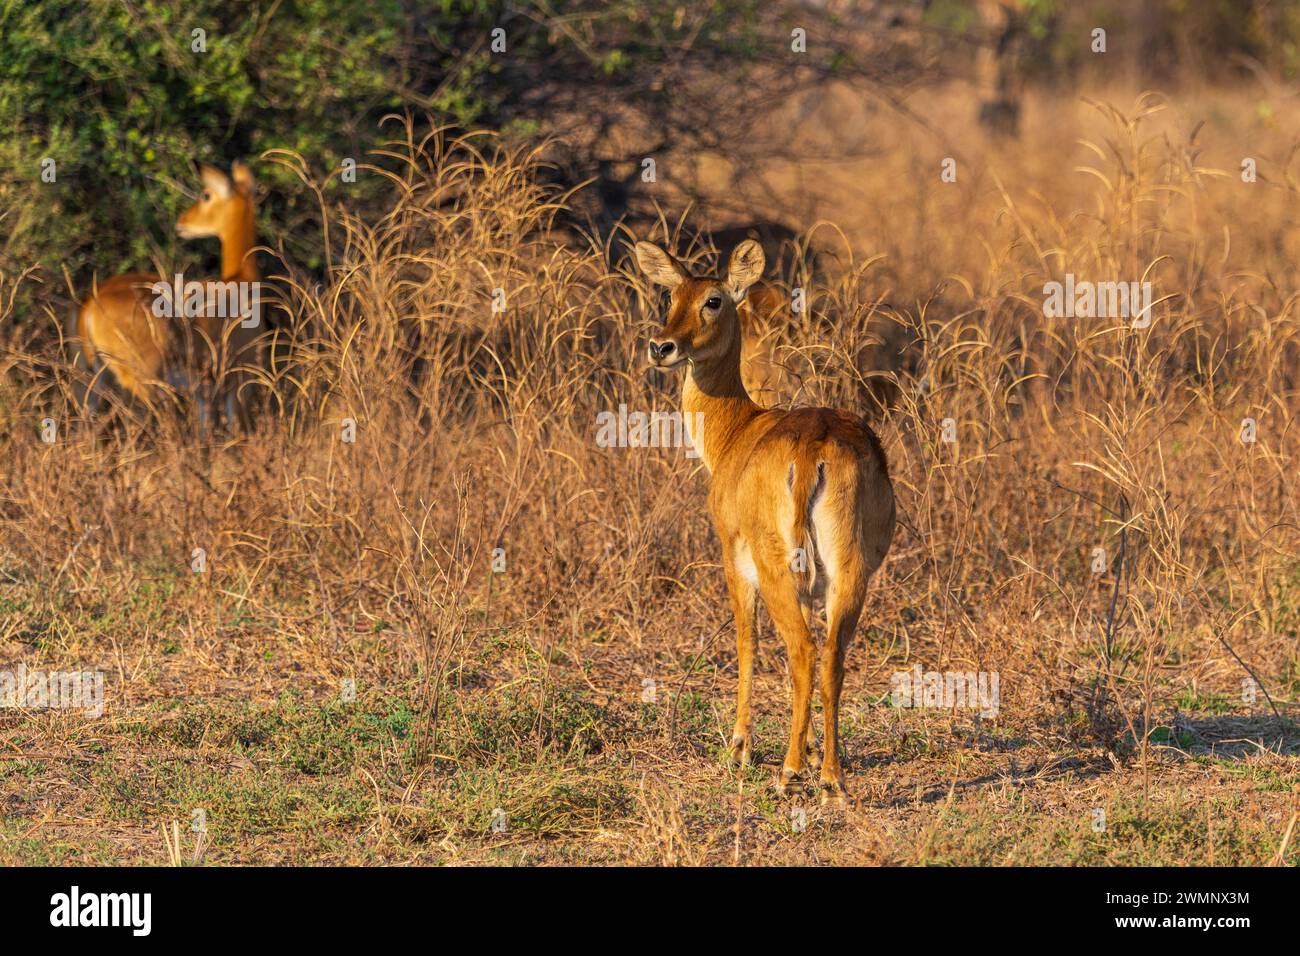 Female puku (Kobus vardonii) standing in grassland in South Luangwa National Park in Zambia, Southern Africa Stock Photo